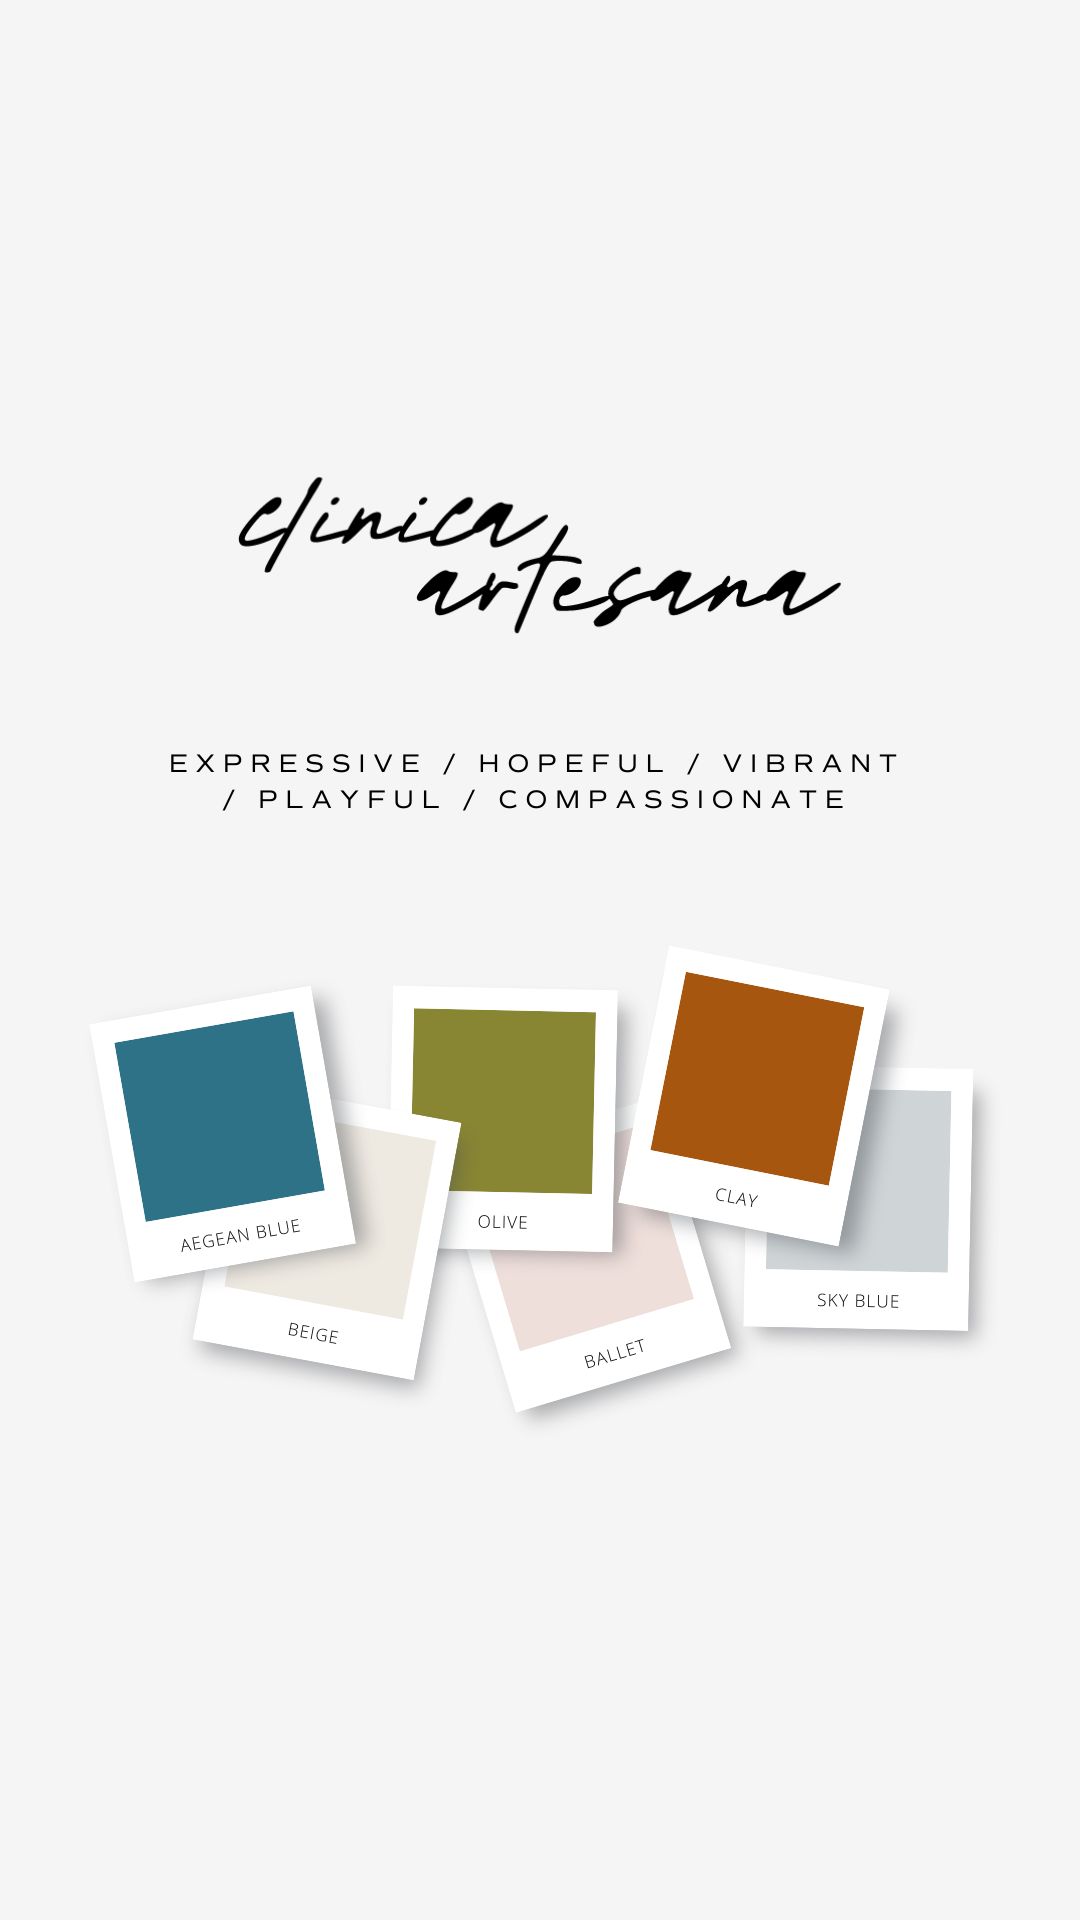 an image that depicts my brand design process using color psychology to showcase the brand color palette for Clinica Artesana